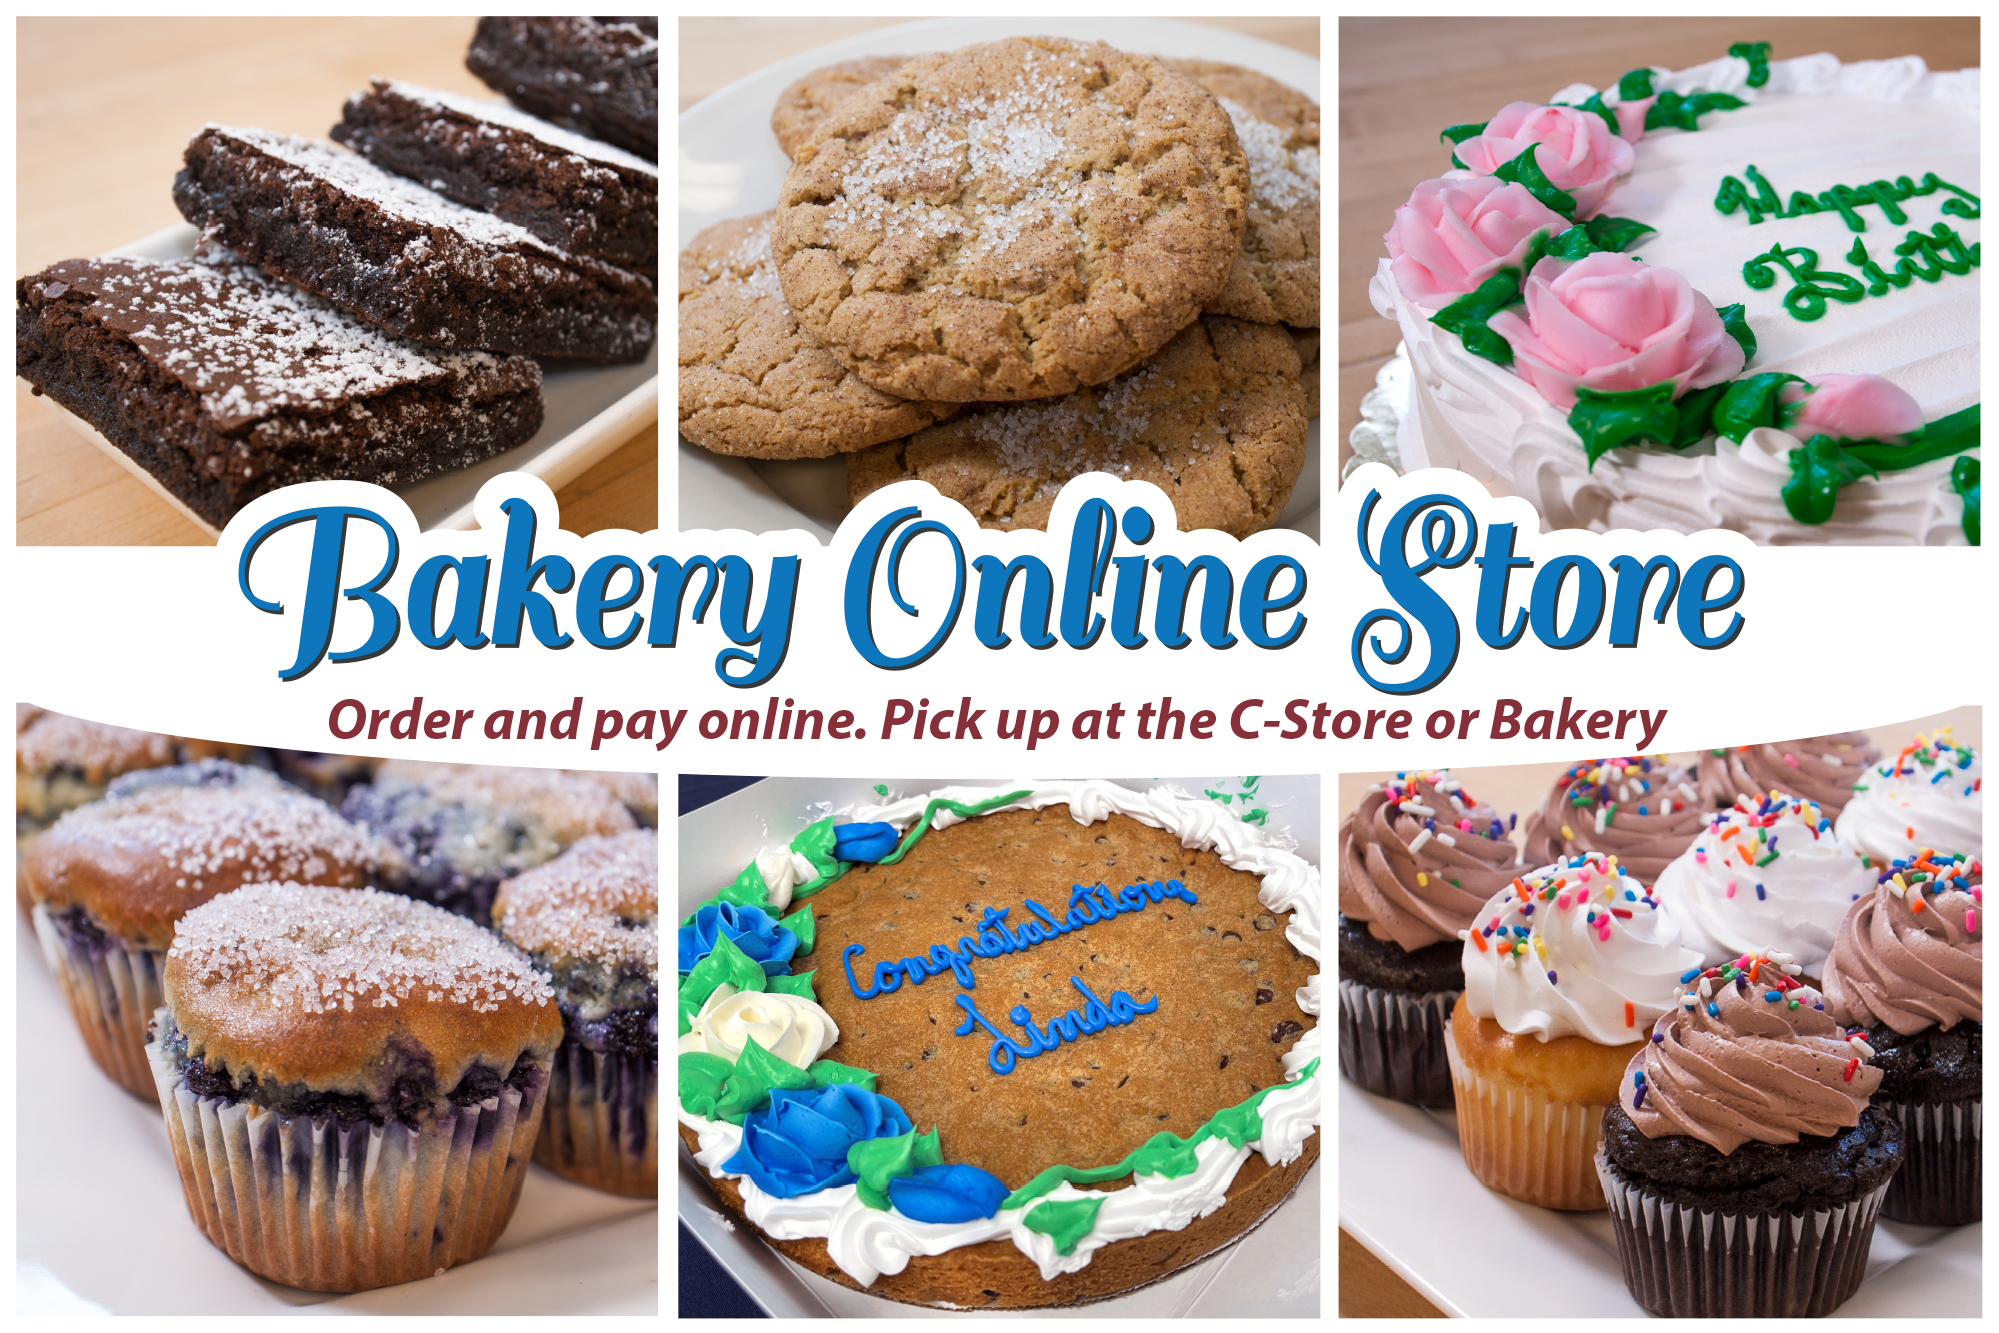 Students and staff can order cakes, and baked goods, including gluten free from the UConn Bakery and pick up their order at the C-Store. 1 week notice is required